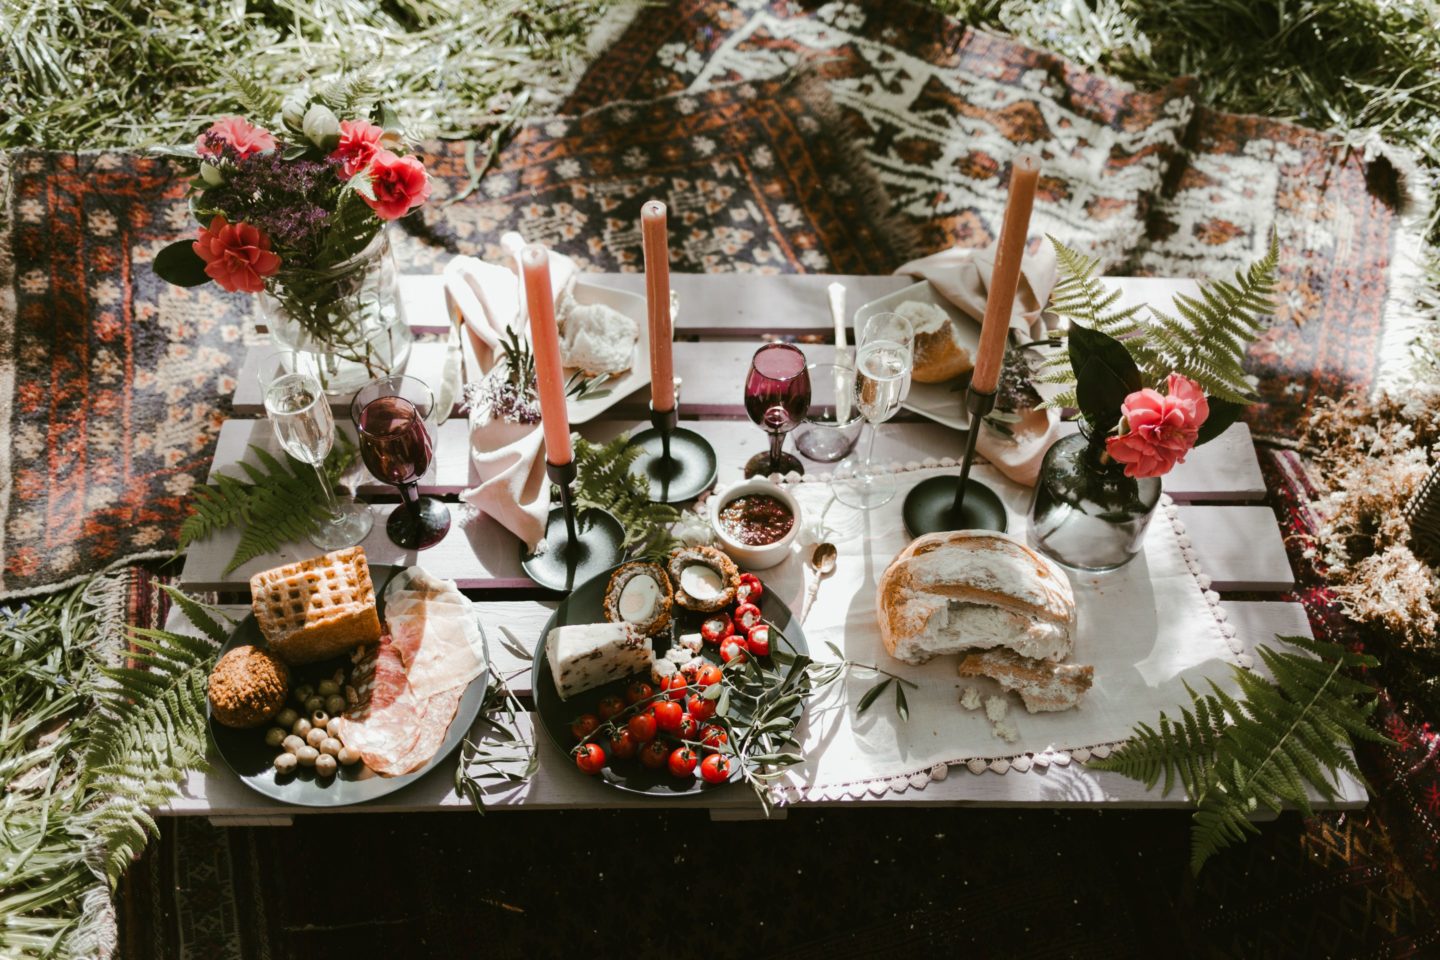 Boho Chic Festival Picnic Wedding With Eclectic Styling